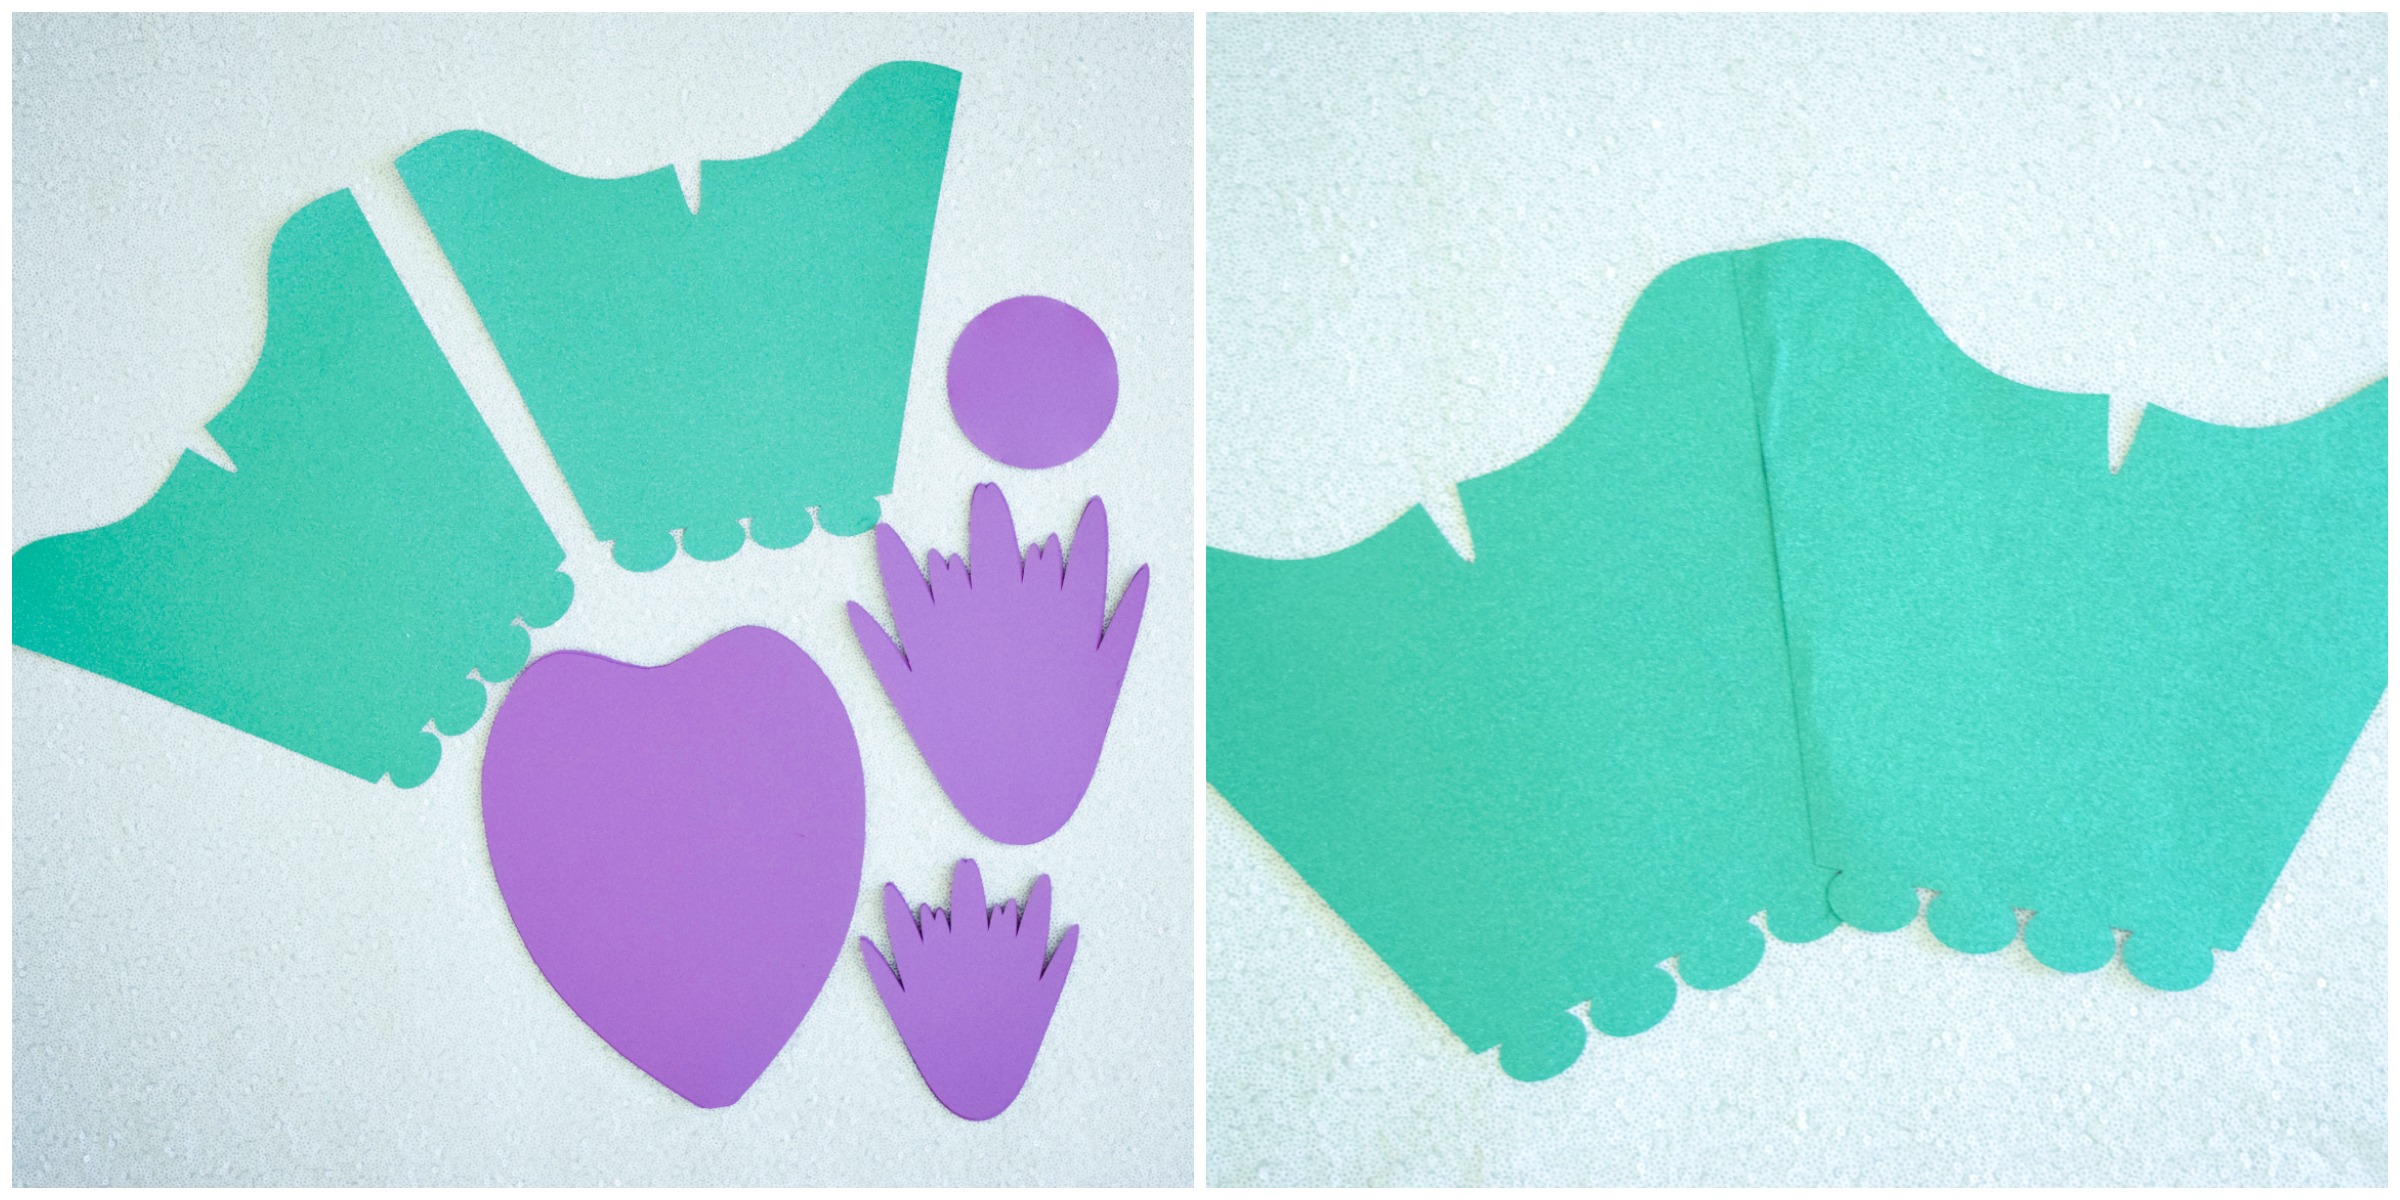 Two side-by-side images show a paper dress bodice template cut out from a seafoam green paper and purple paper.